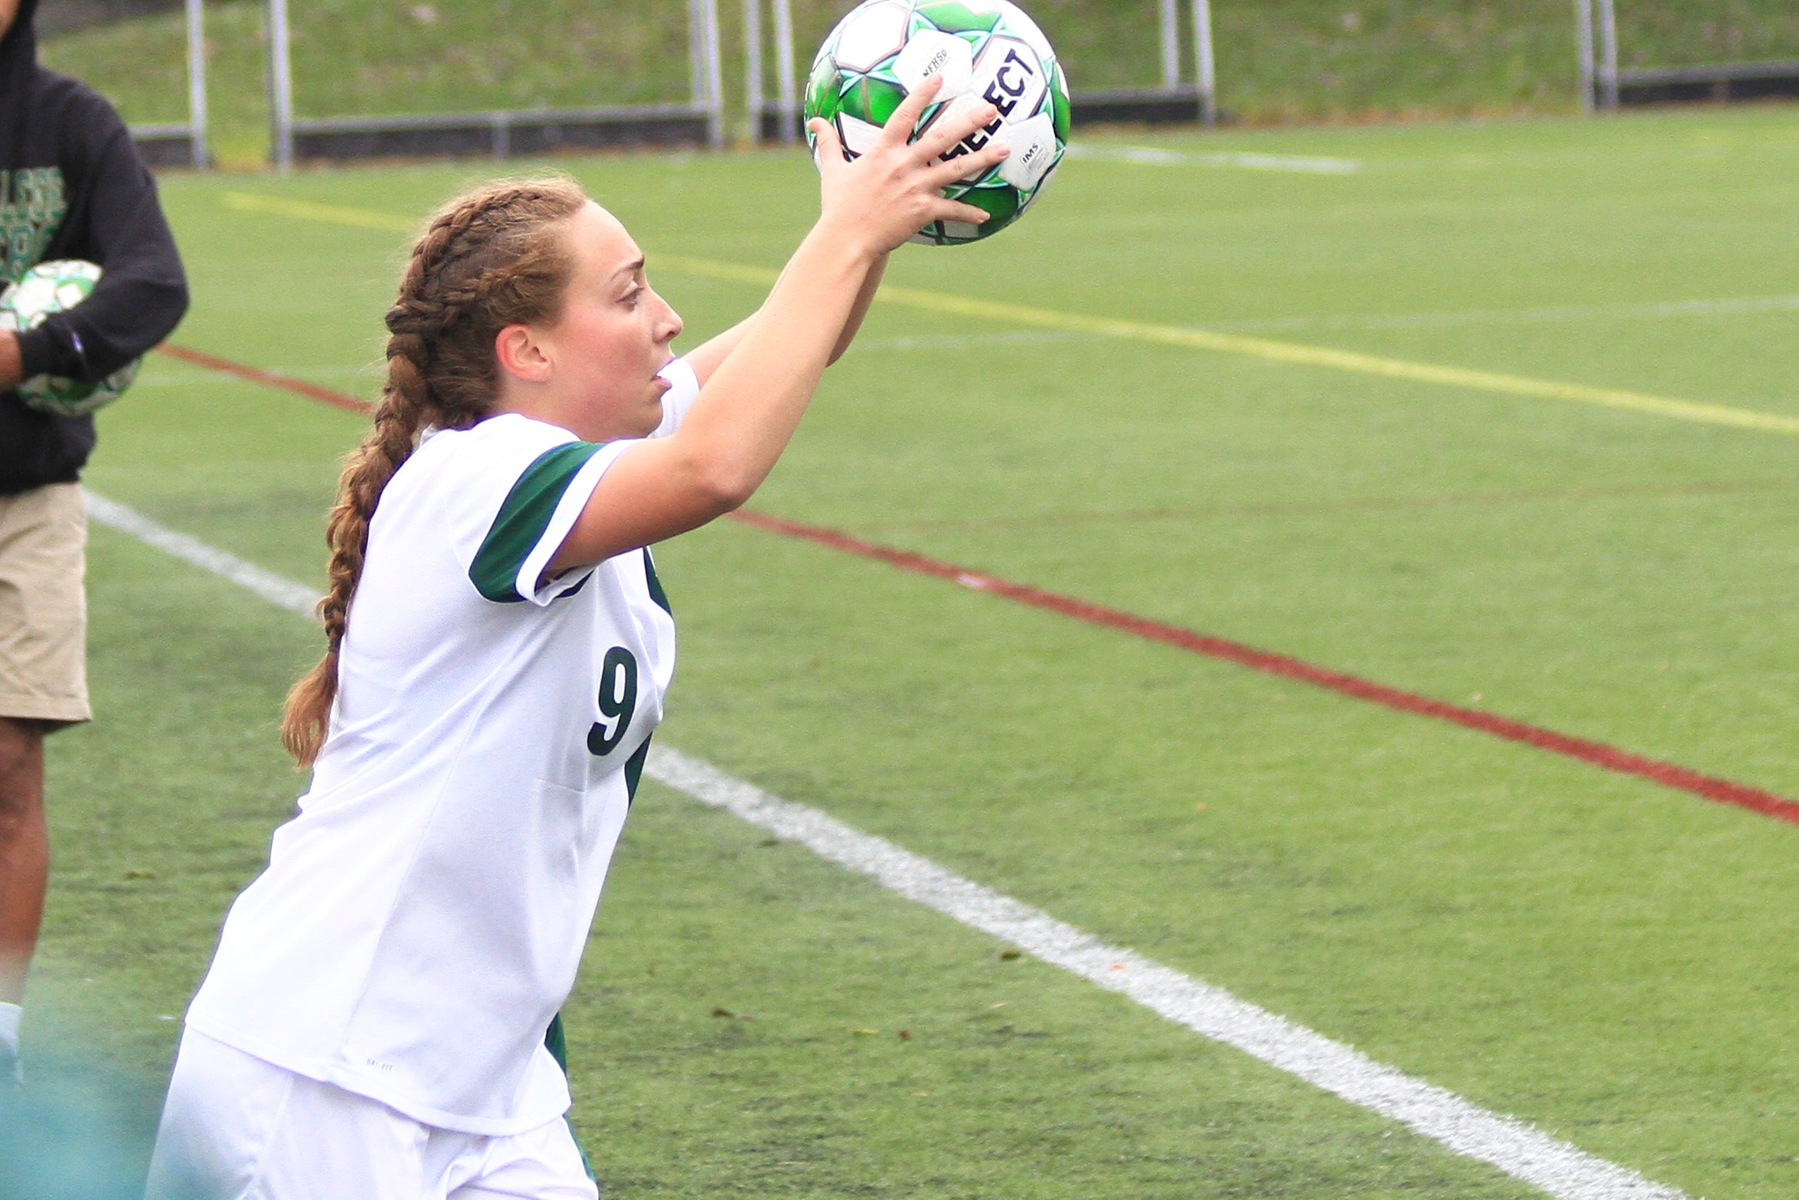 Blazers And Pilgrims Play To 1-1 Tie In NECC Action